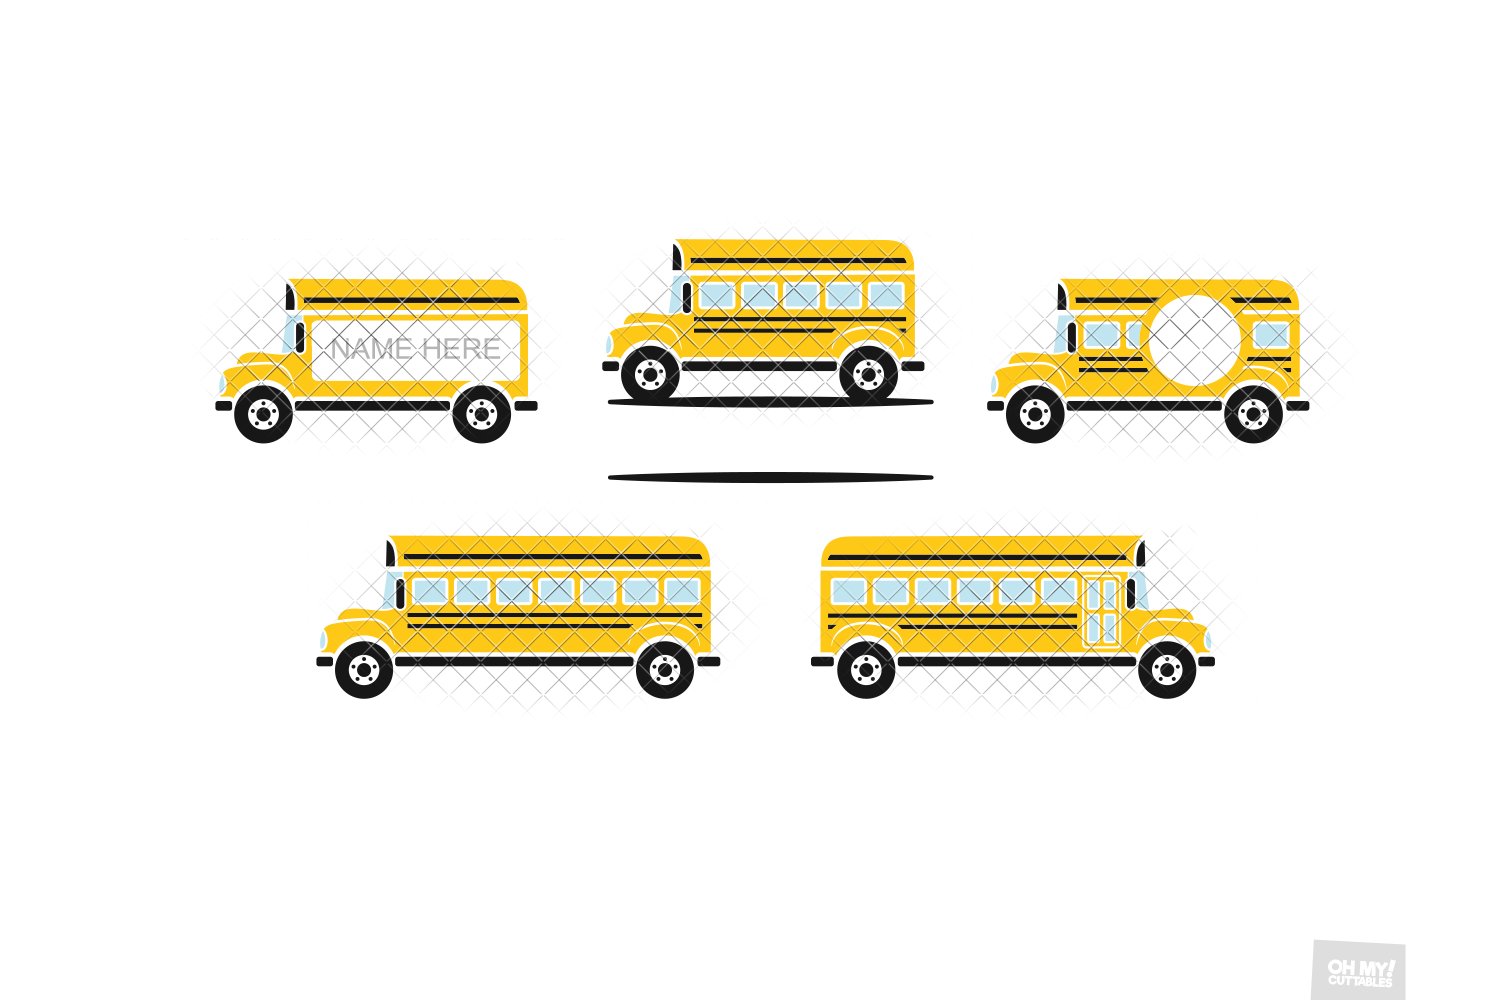 School Bus SVG Driver in SVG, DXF, PNG, EPS, JPG (295424 ...